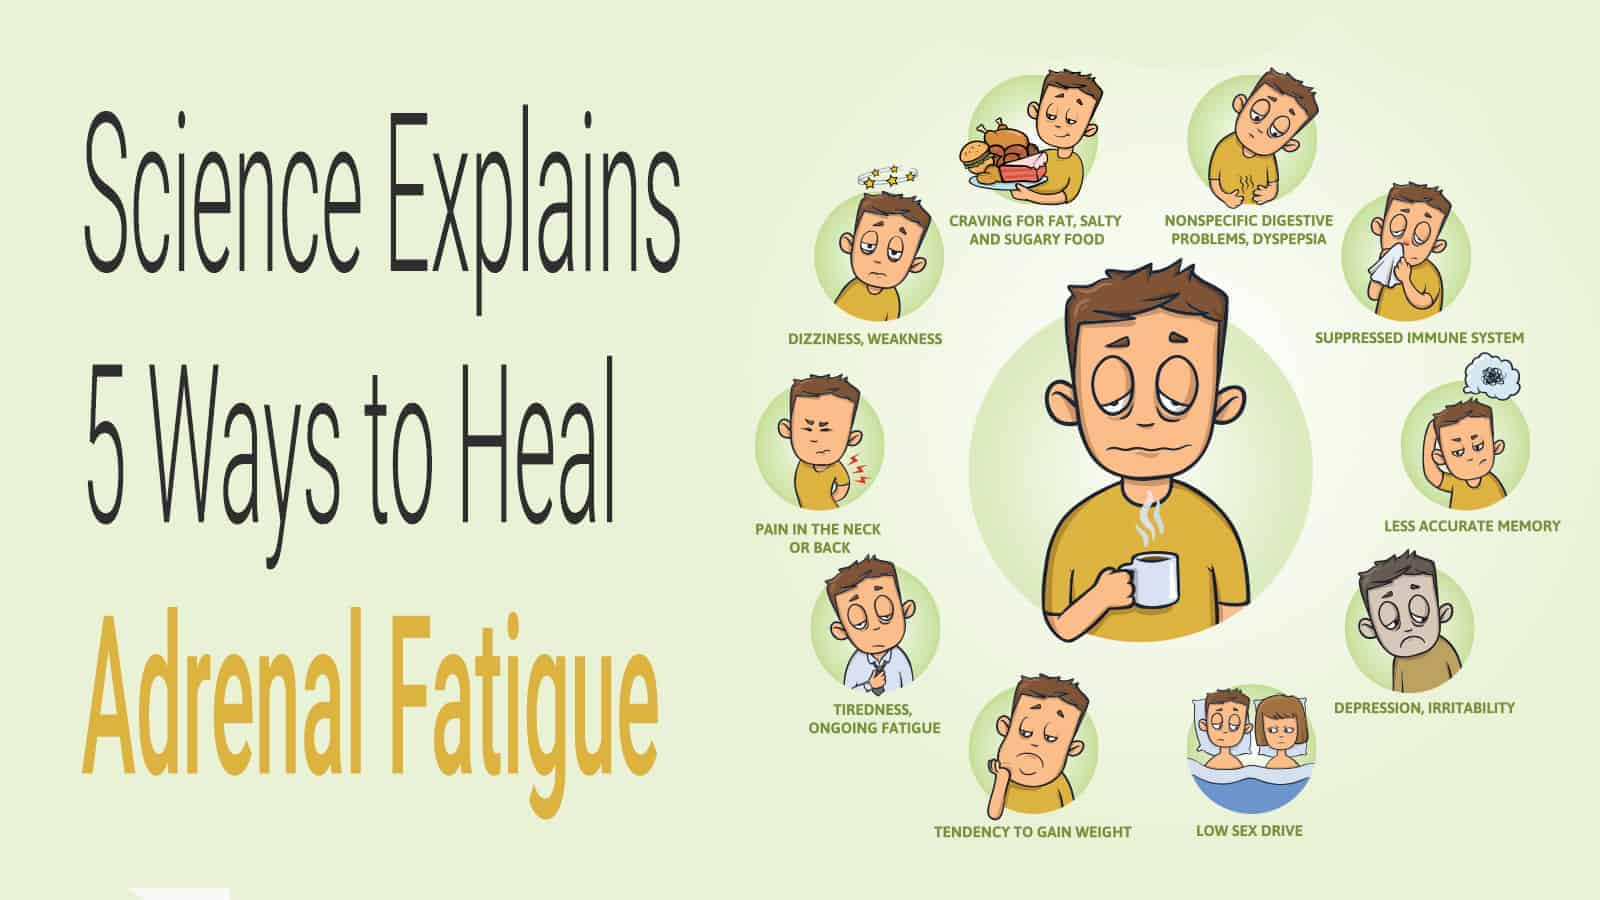 Science Explains 5 Ways to Heal Adrenal Fatigue